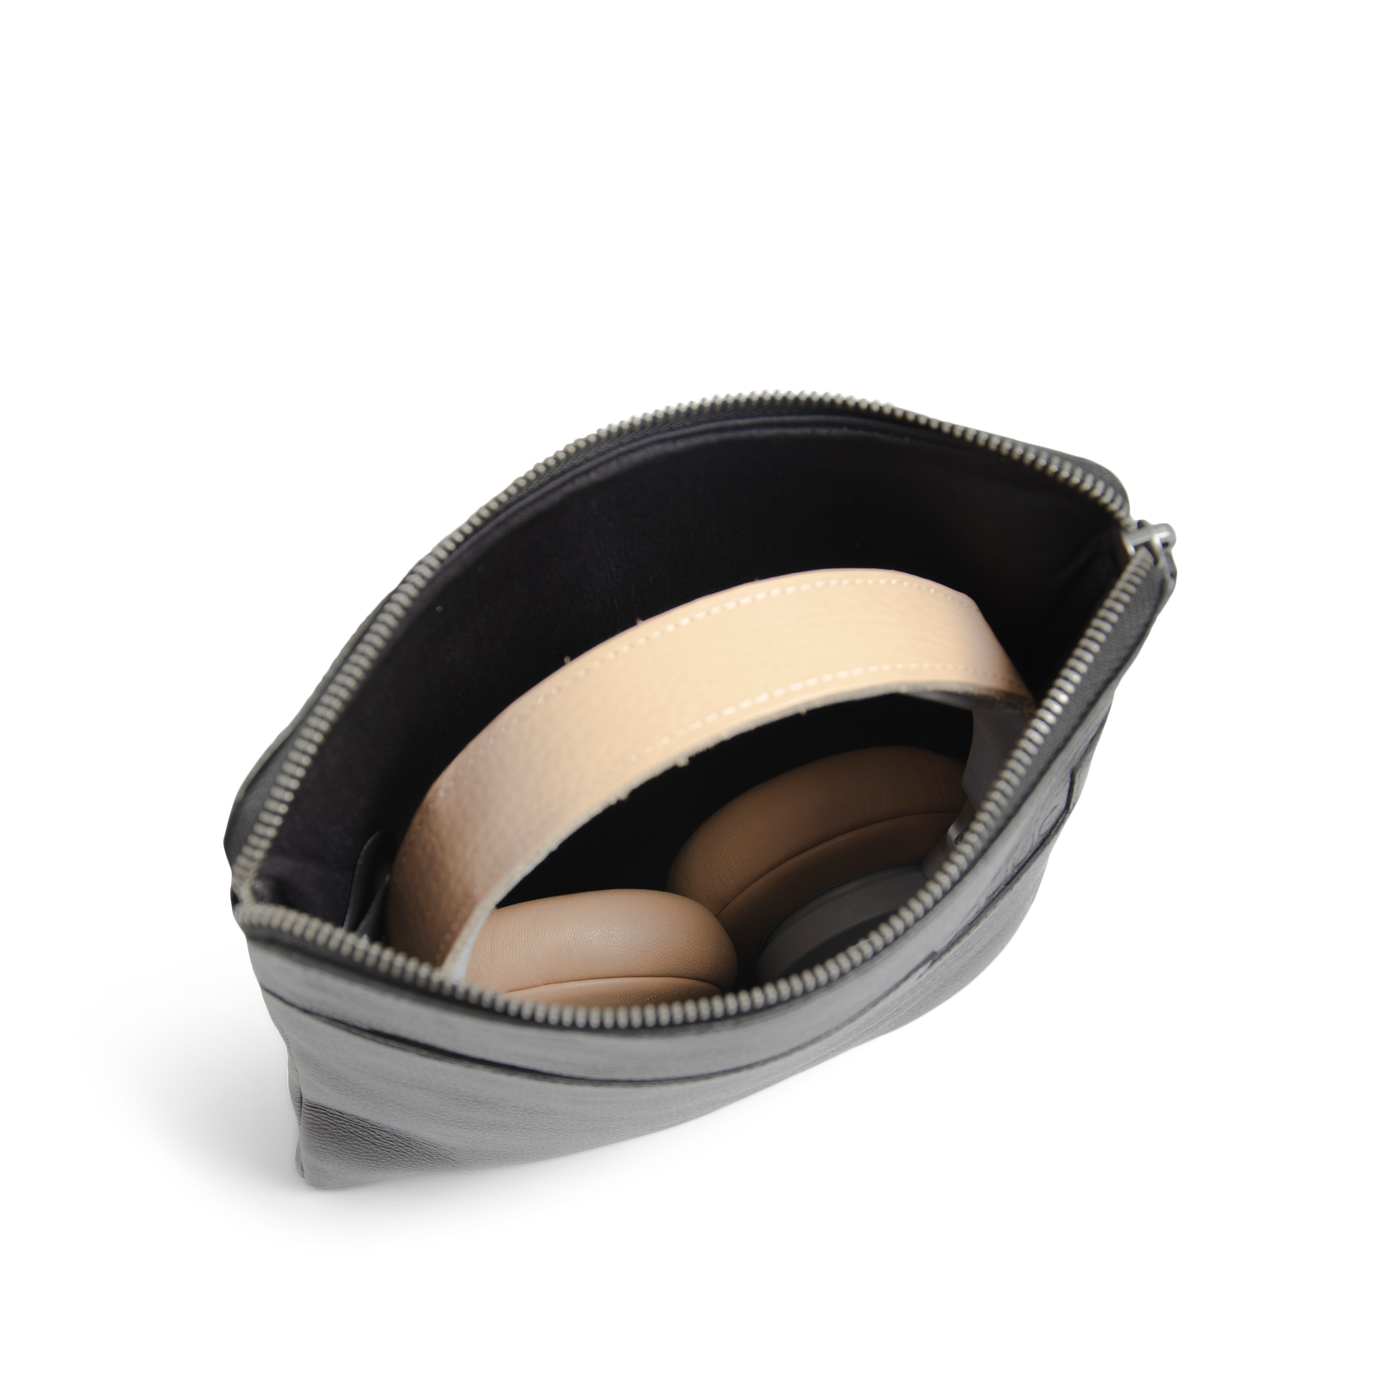 muud bologna beoplay case Kampagne Black